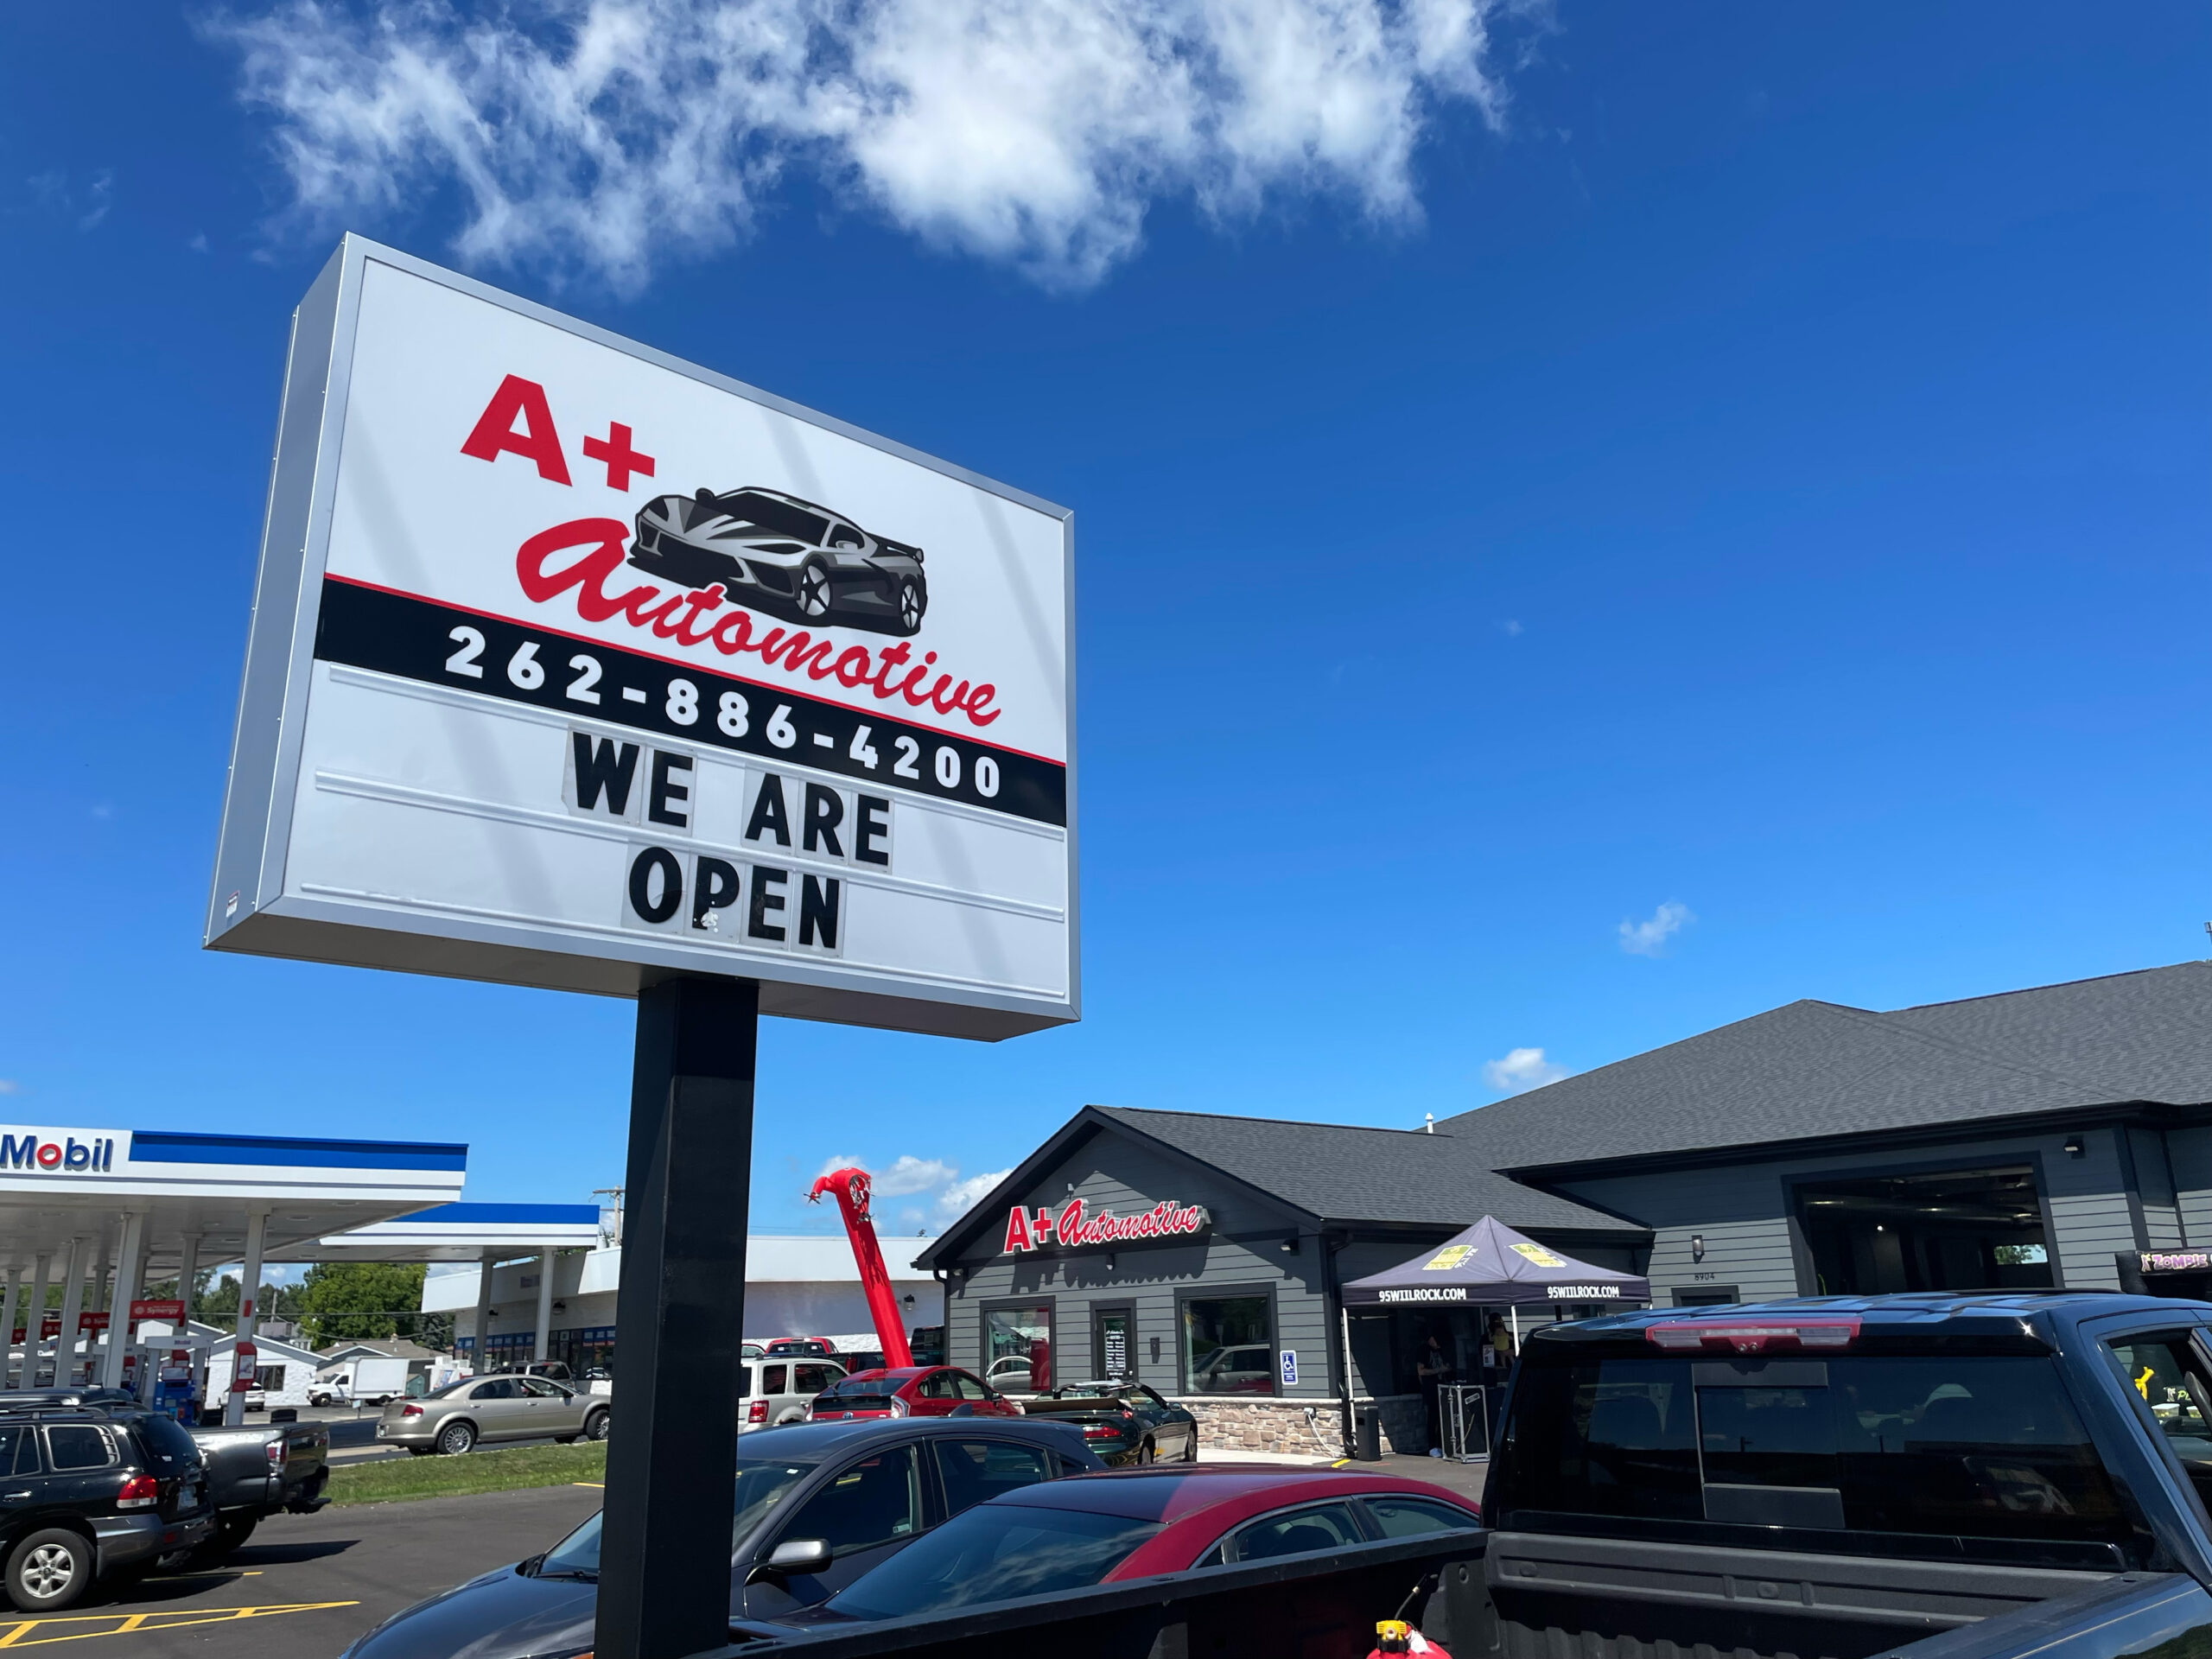 A+ Automotive in Sturtevant